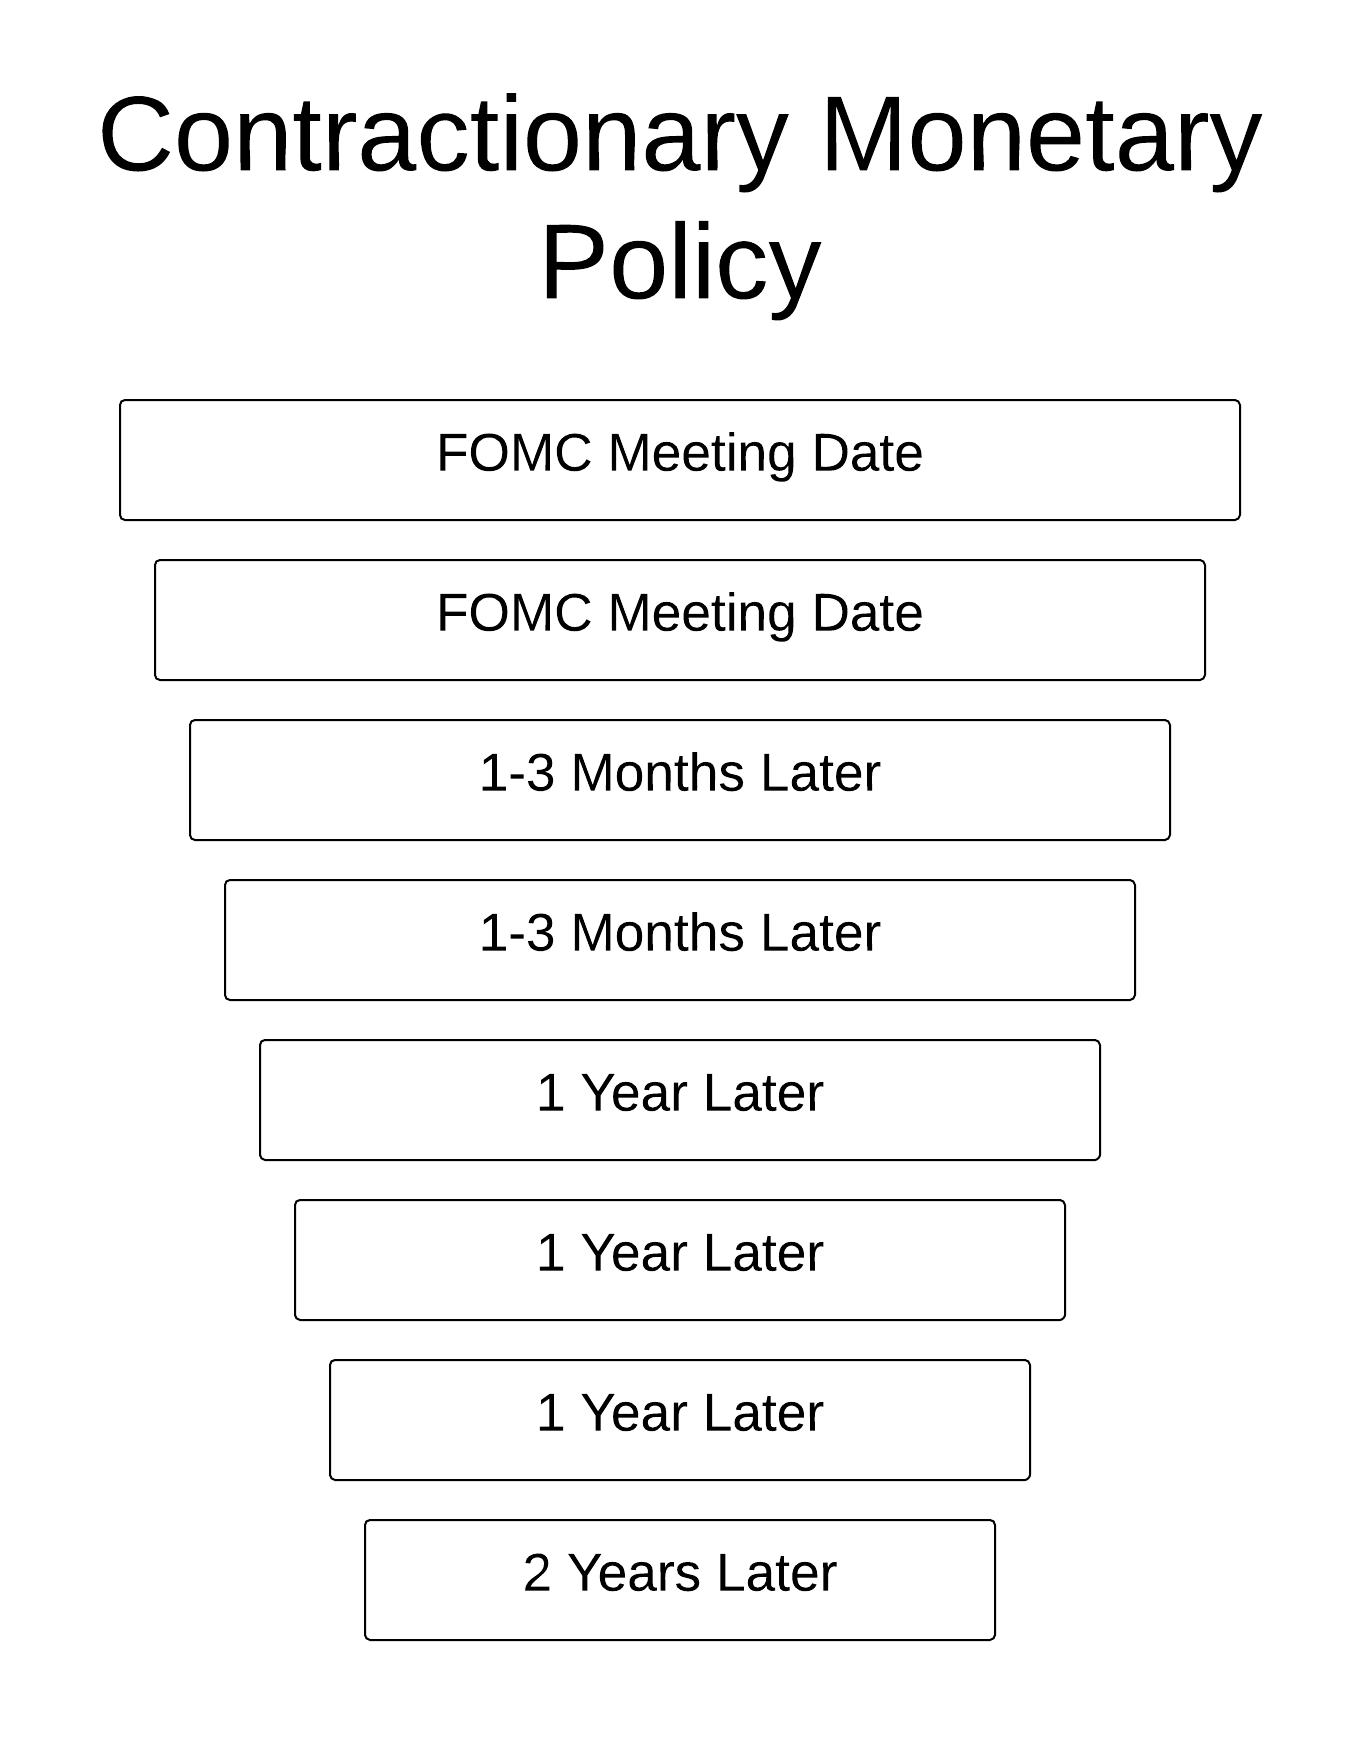 The diagram summarizes steps 1 through 8, outlining the contractionary monetary policy. The Contractionary Monetary Policy Transmission include the following eight steps: step 1, The Fed raises the federal funds rate (after the FOMC Meeting Date), step 2, Other short-term interest rates rise and the exchange rate rises (after the FOMC Meeting Date), step 3, The quantity of money and supply of loanable funds decrease (after 1 to 3 Months), step 4, The long-term real interest rate rises (after 1 to 3 Months), step 5, Consumption expenditure, investment, and net exports decrease (after 1 Year), step 6, Aggregate demand decreases (after 1 Year), step 7, Real GDP growth rate decreases (after 1 Year) — which represents the cost associated with this policy, and step 8, Inflation rate decreases (after 2 Years) — which represents the gain associated with this policy.